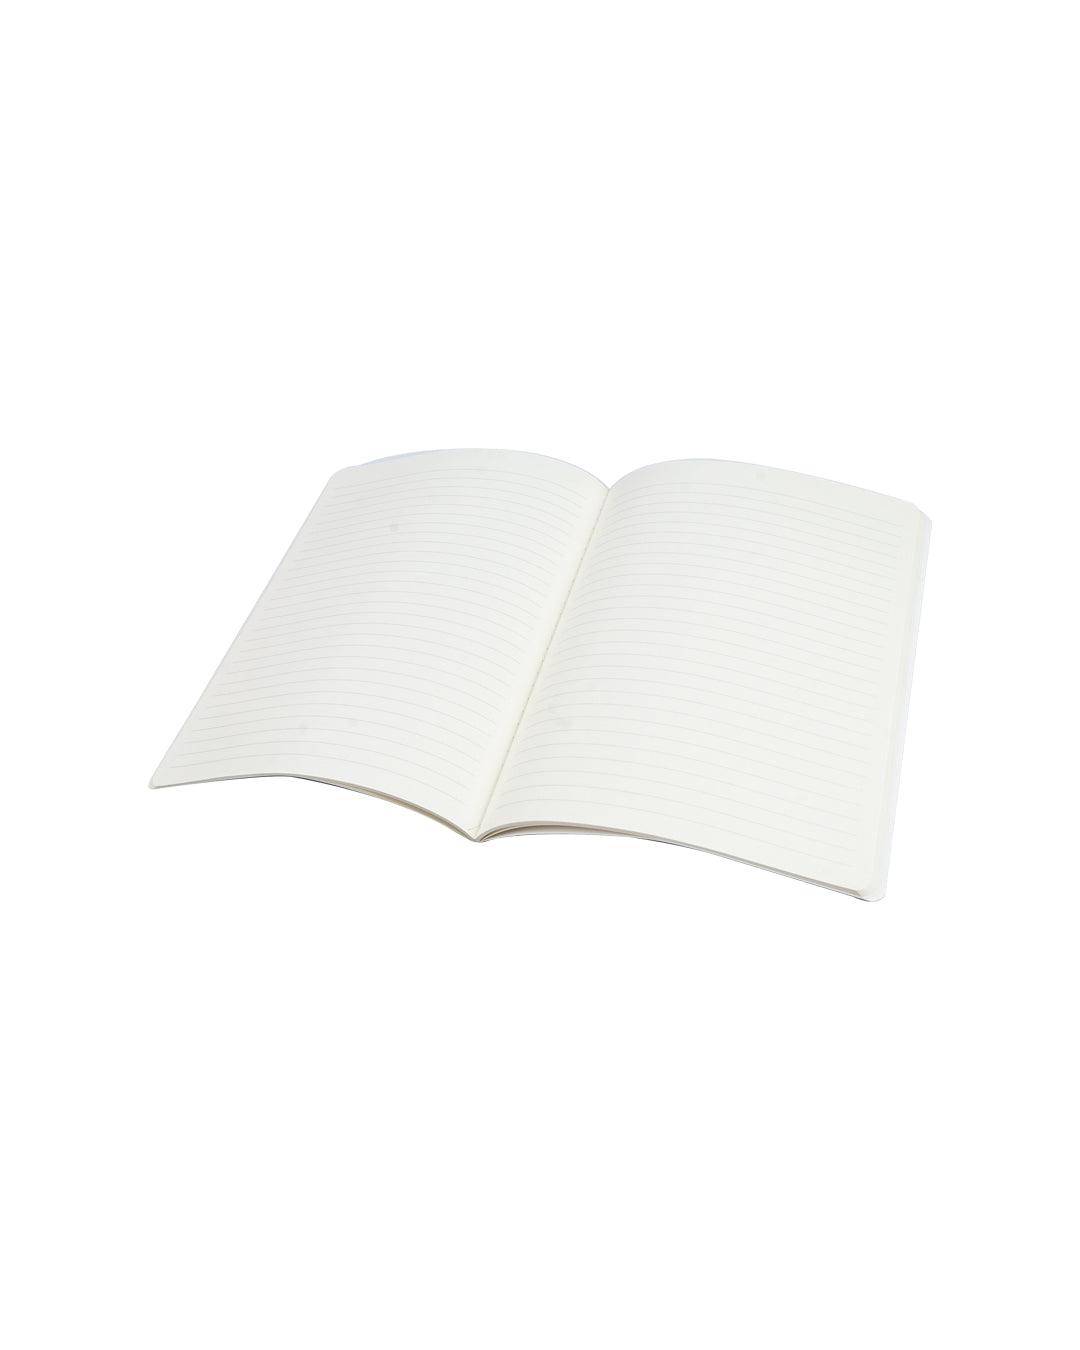 Notebooks, 64 Pages, Off White & Green, Set of 2 - MARKET 99